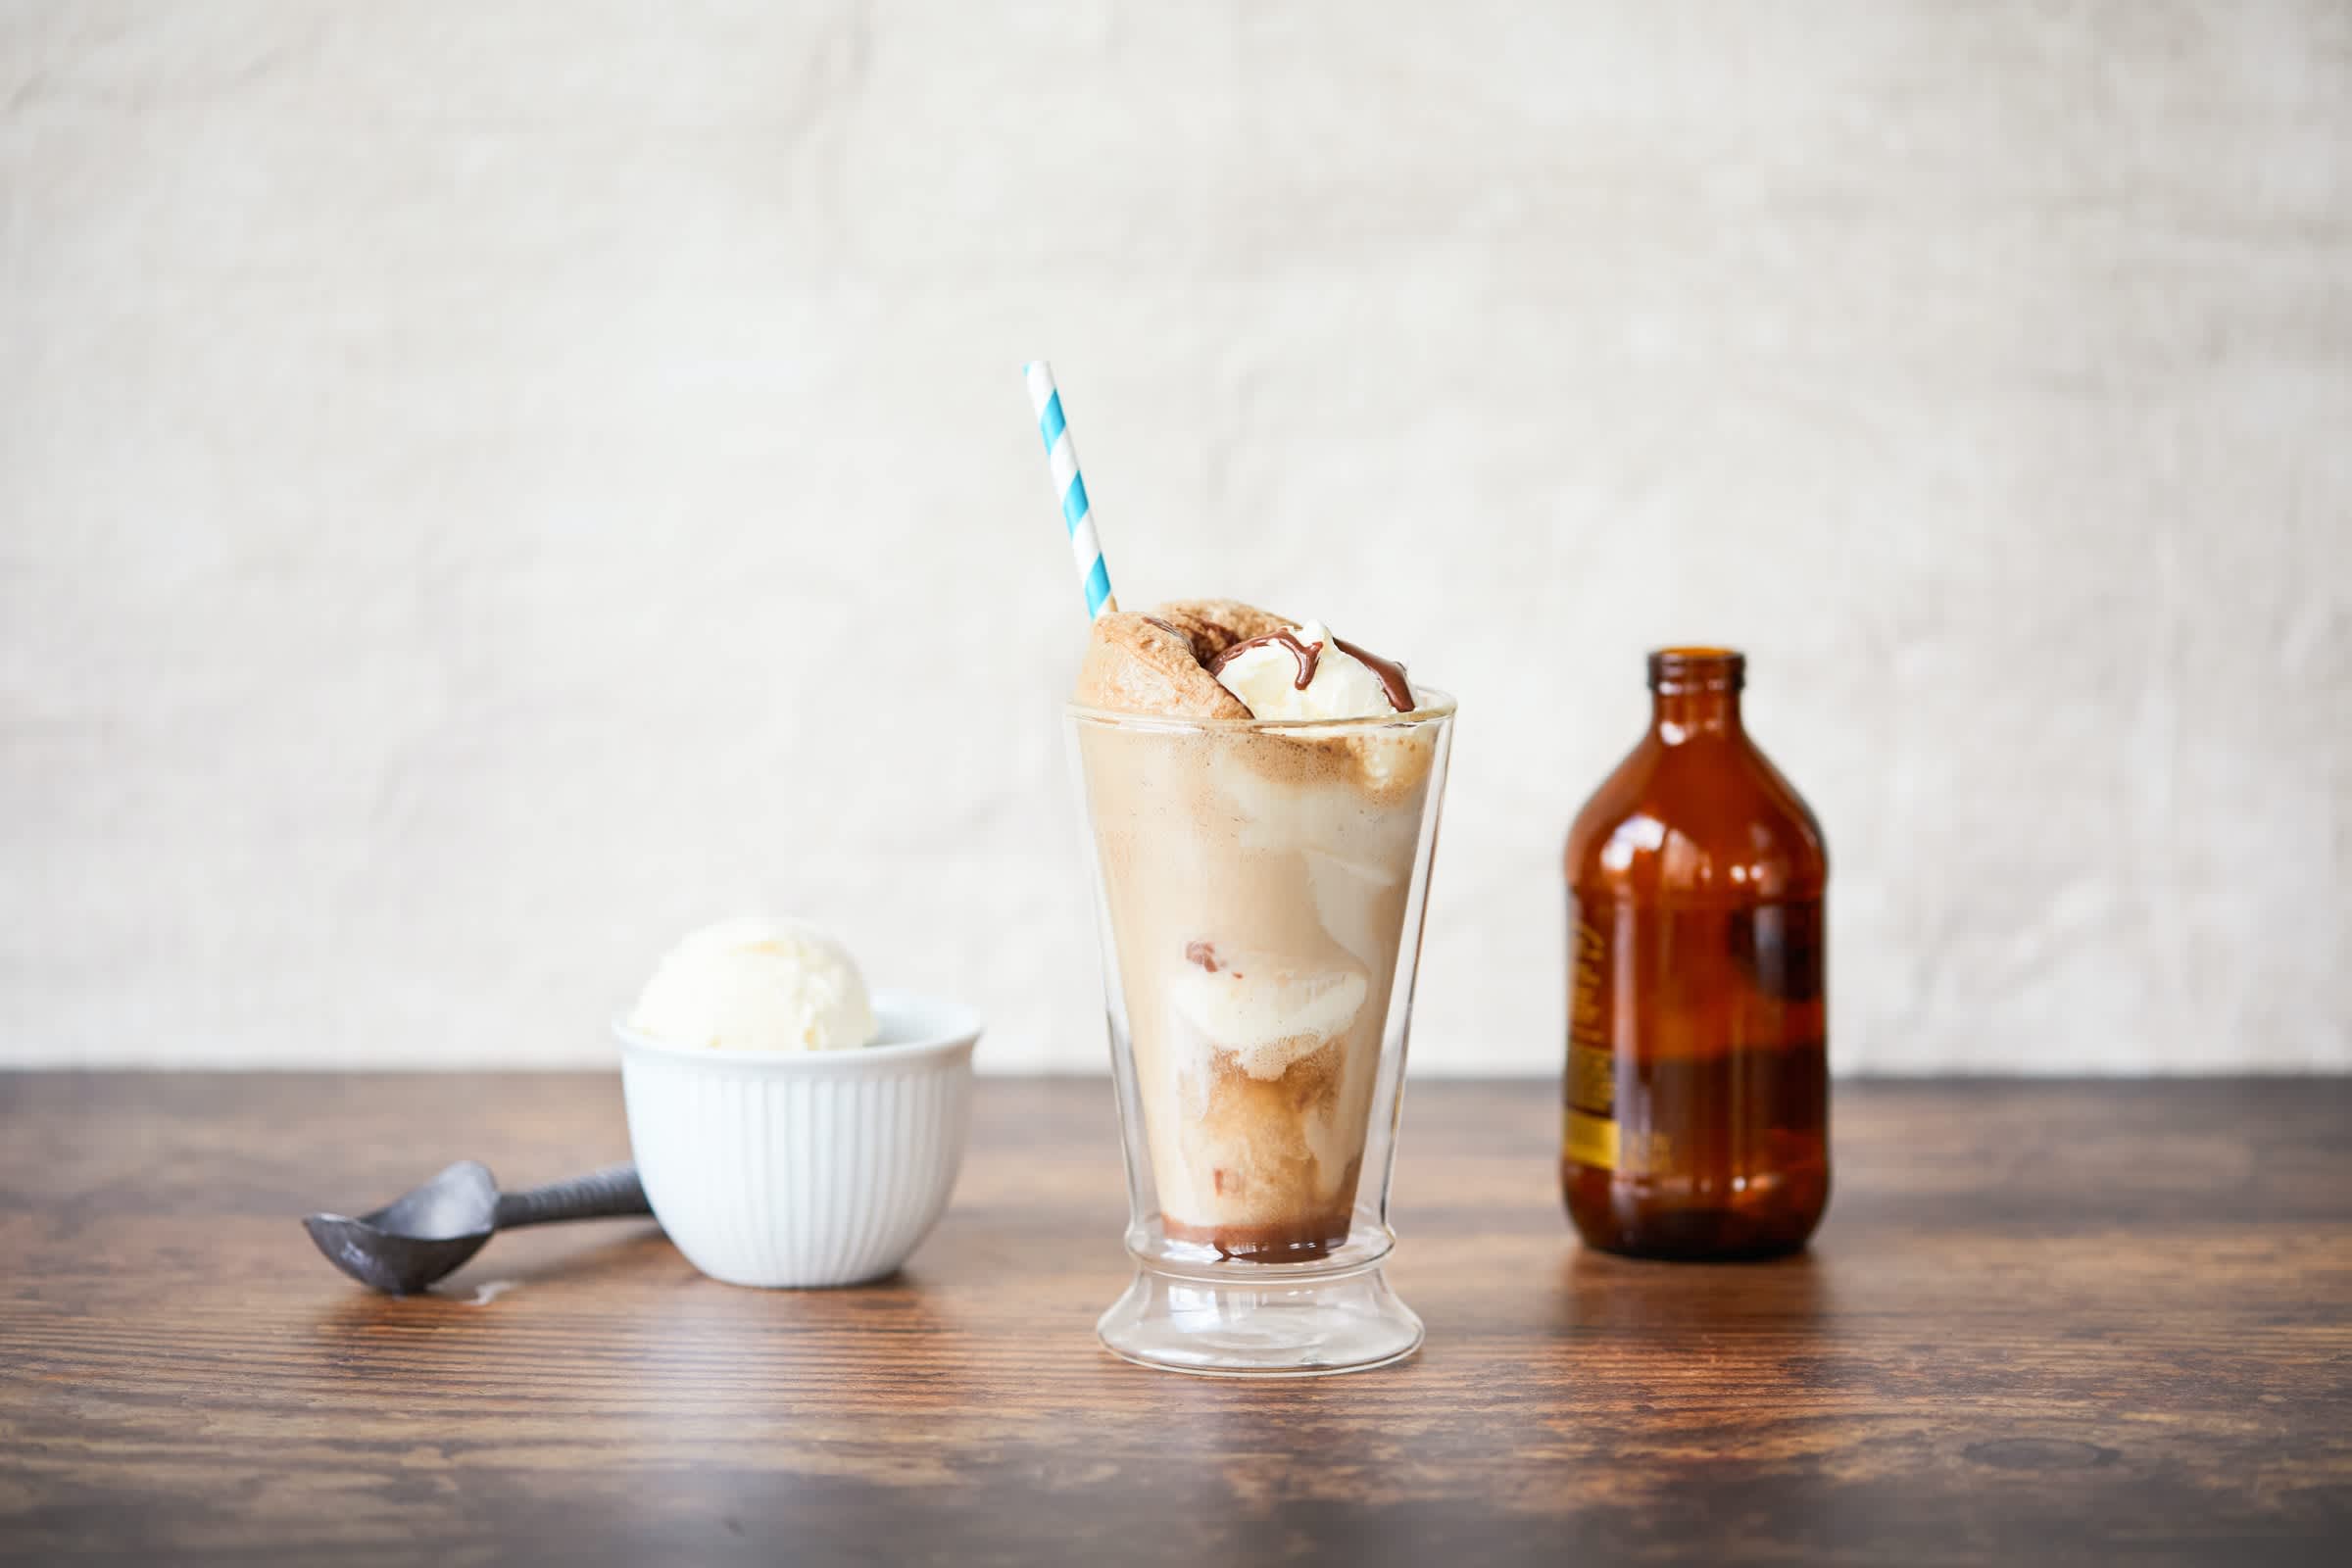 Little bottle of root beer next to a floating vanilla ice cream